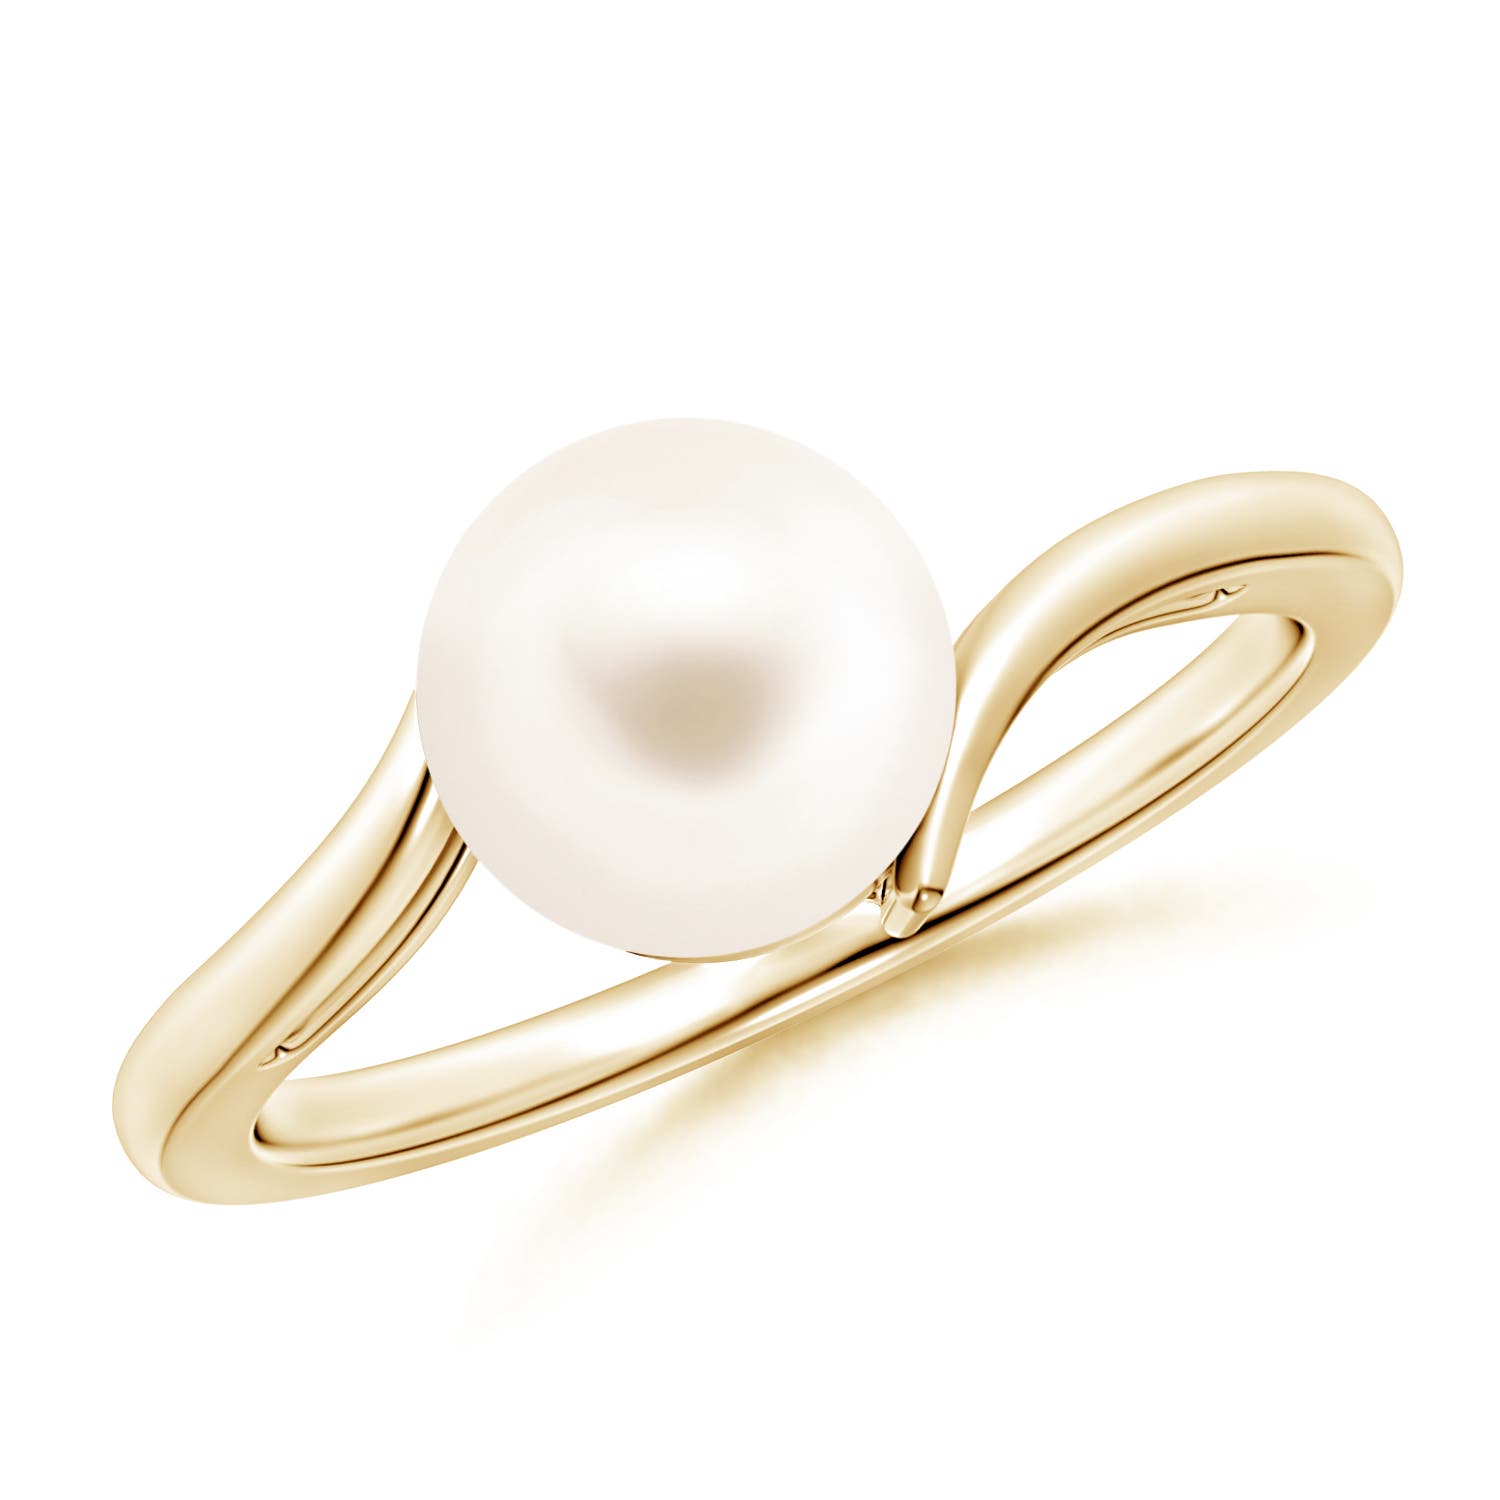 Shop Pearl Jewelry for Women with Unique Designs | Angara